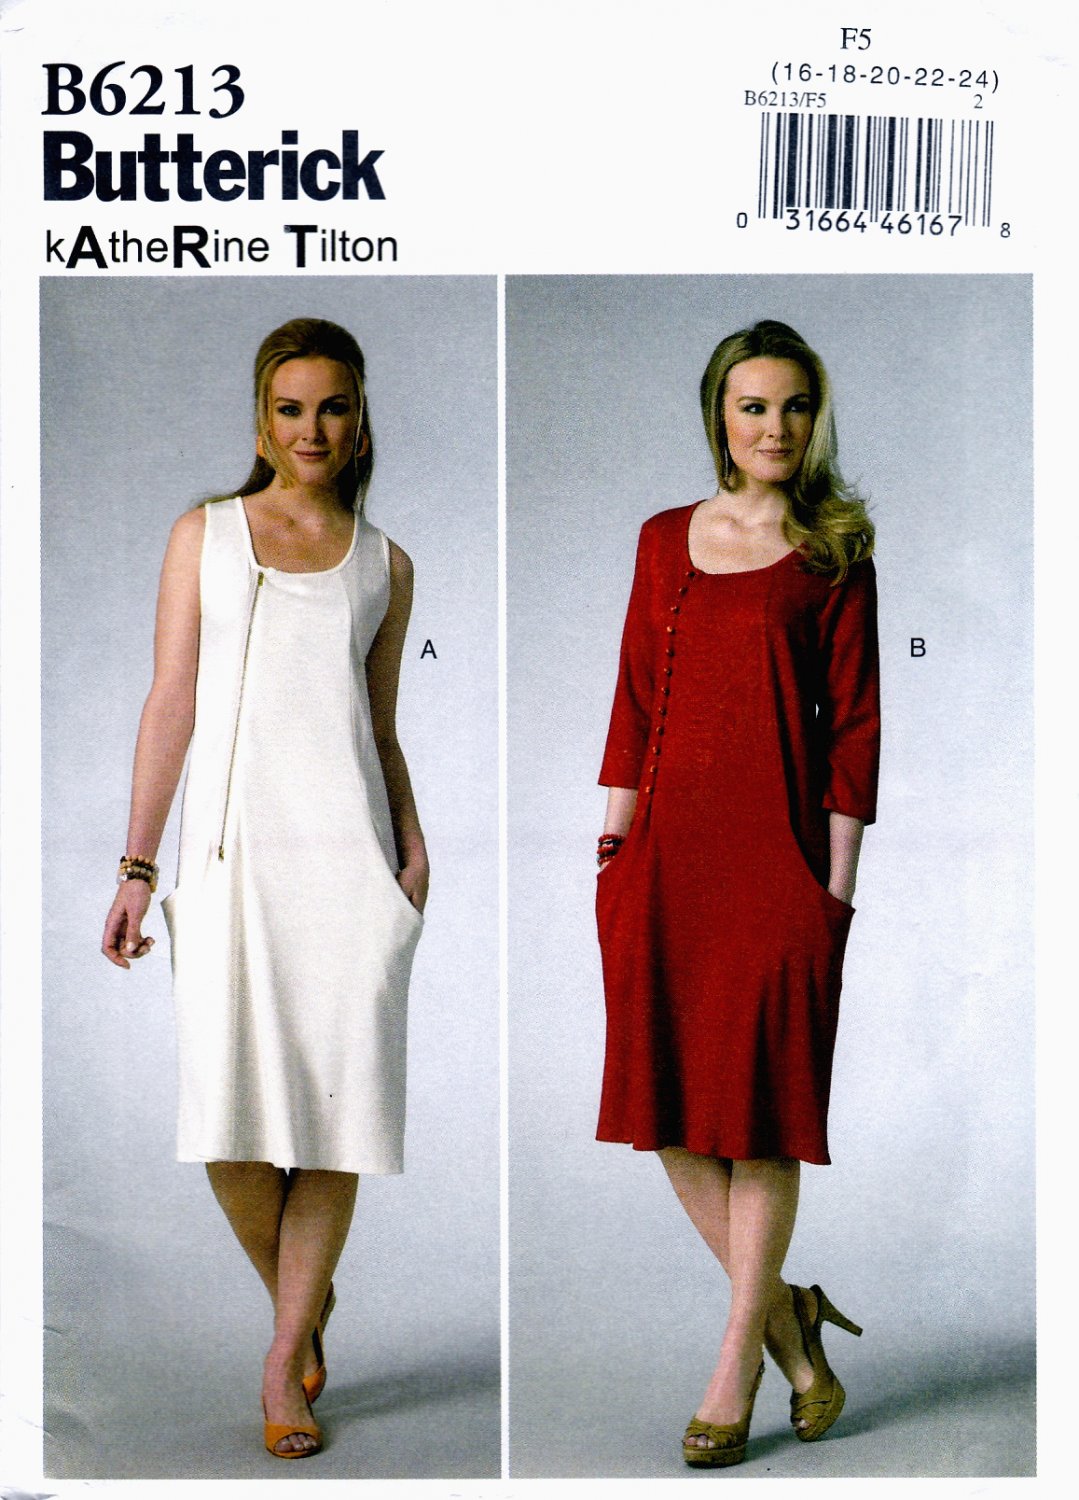 Butterick B6213 Misses Womens Jumper and Dress Sewing Pattern Sizes 16-18-20-22-24